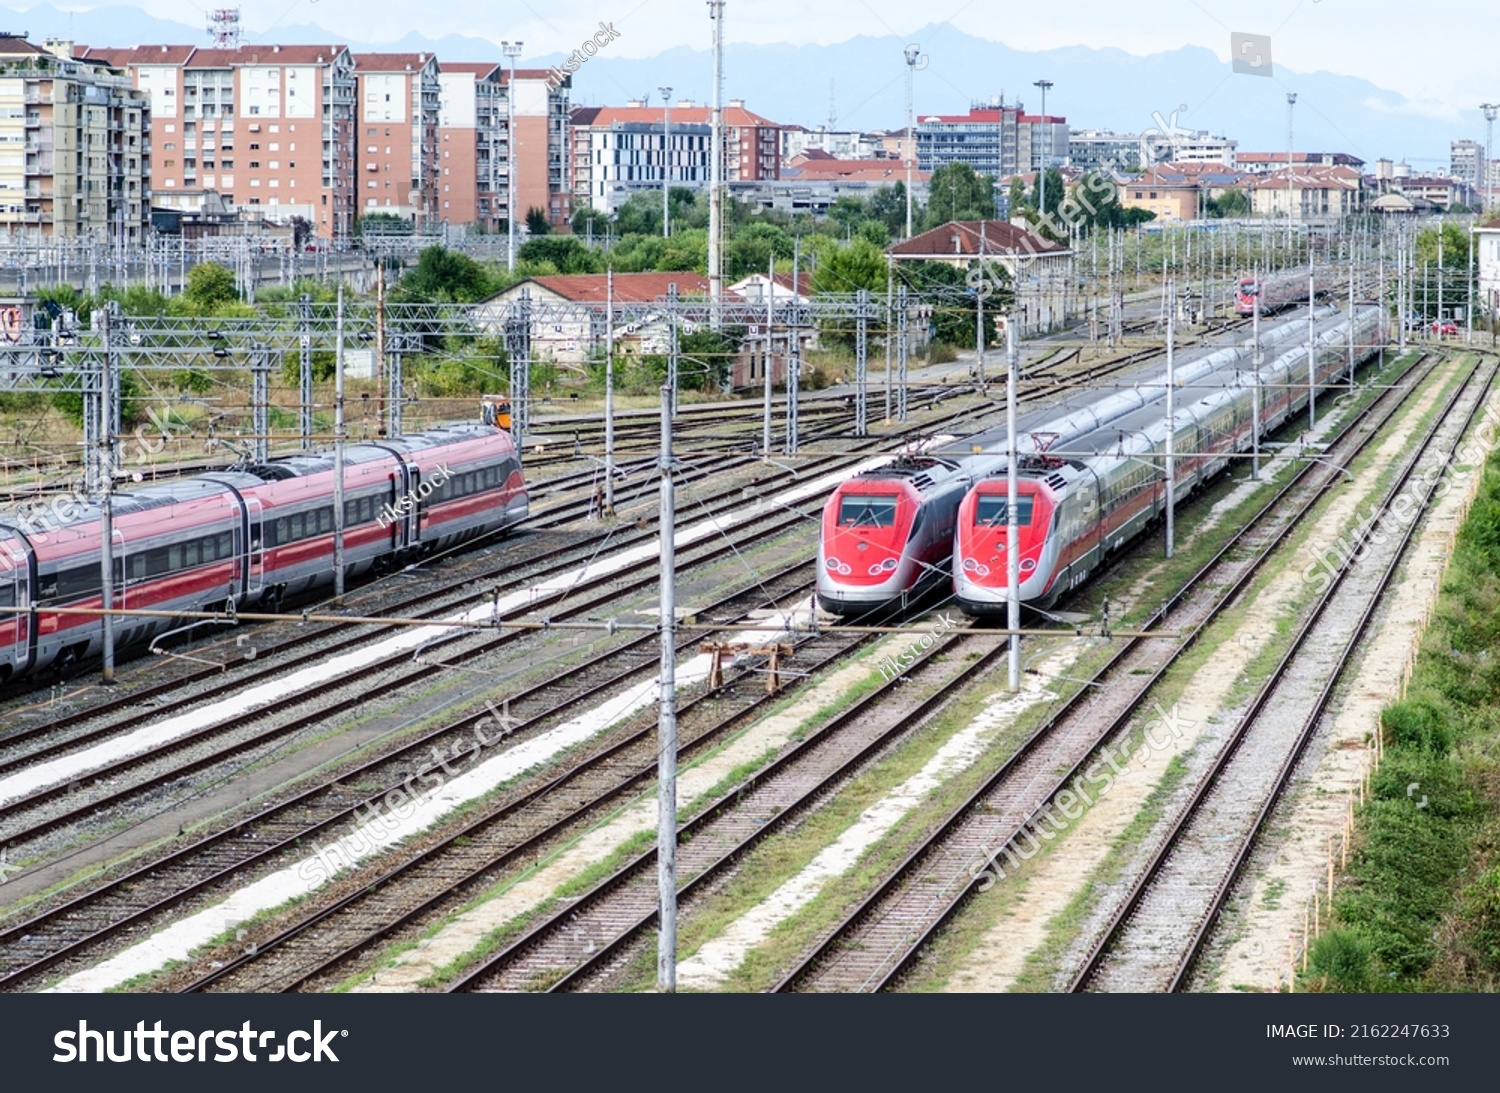 high-speed trains: two trains on tracks ready to travel and transport passengers for economic activities and tourism. Ideal for traveling on holidays, economic and green transport par excellence. #2162247633